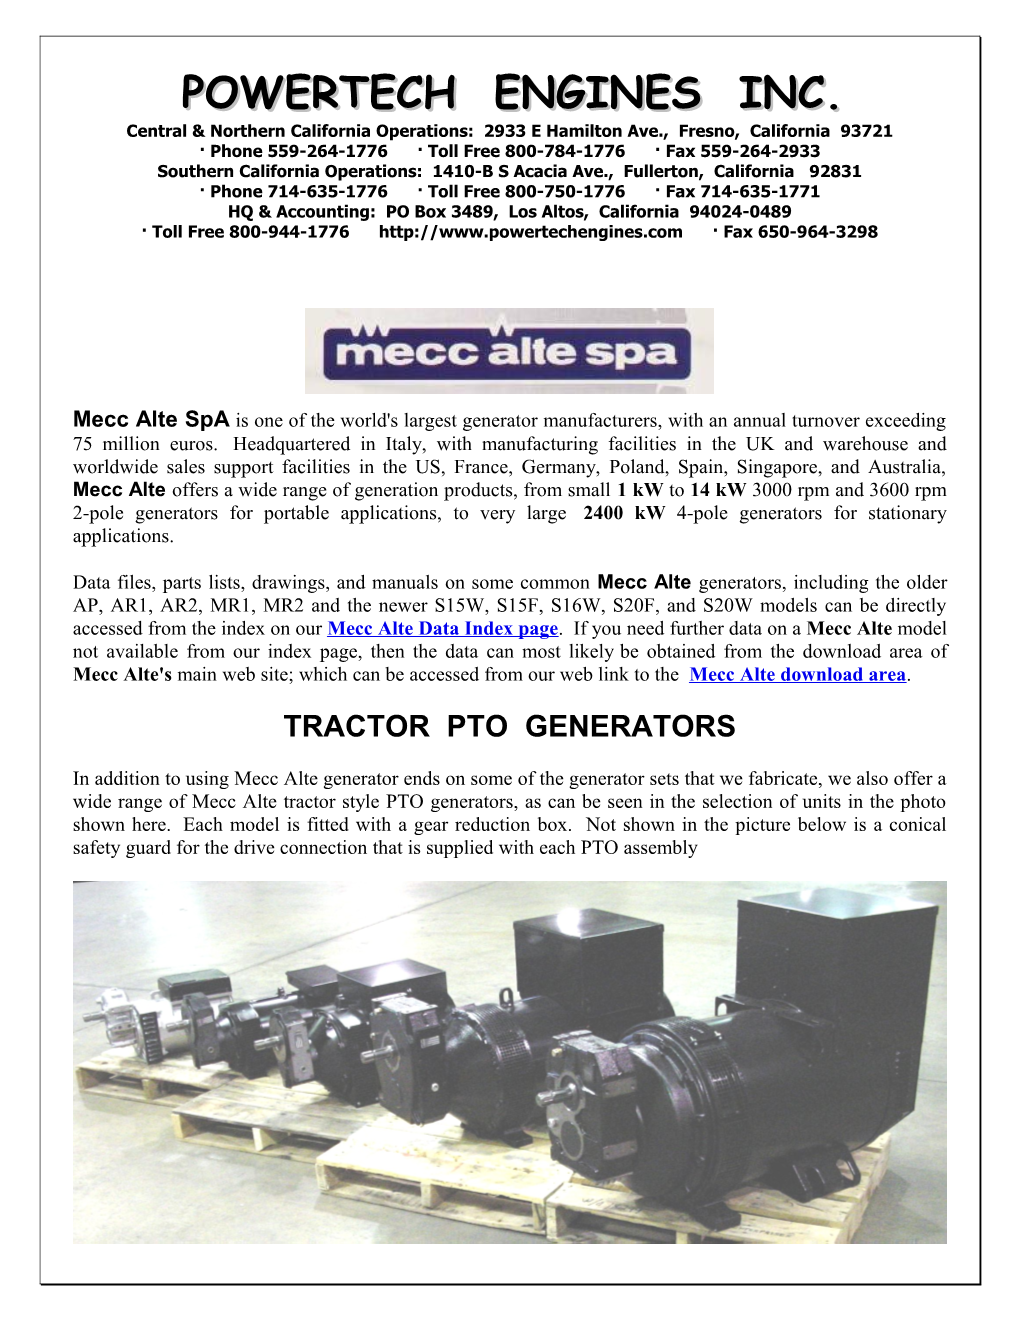 Mecc Alte Spa Is One of the World's Largest Generator Manufacturers, with an Annual Turnover